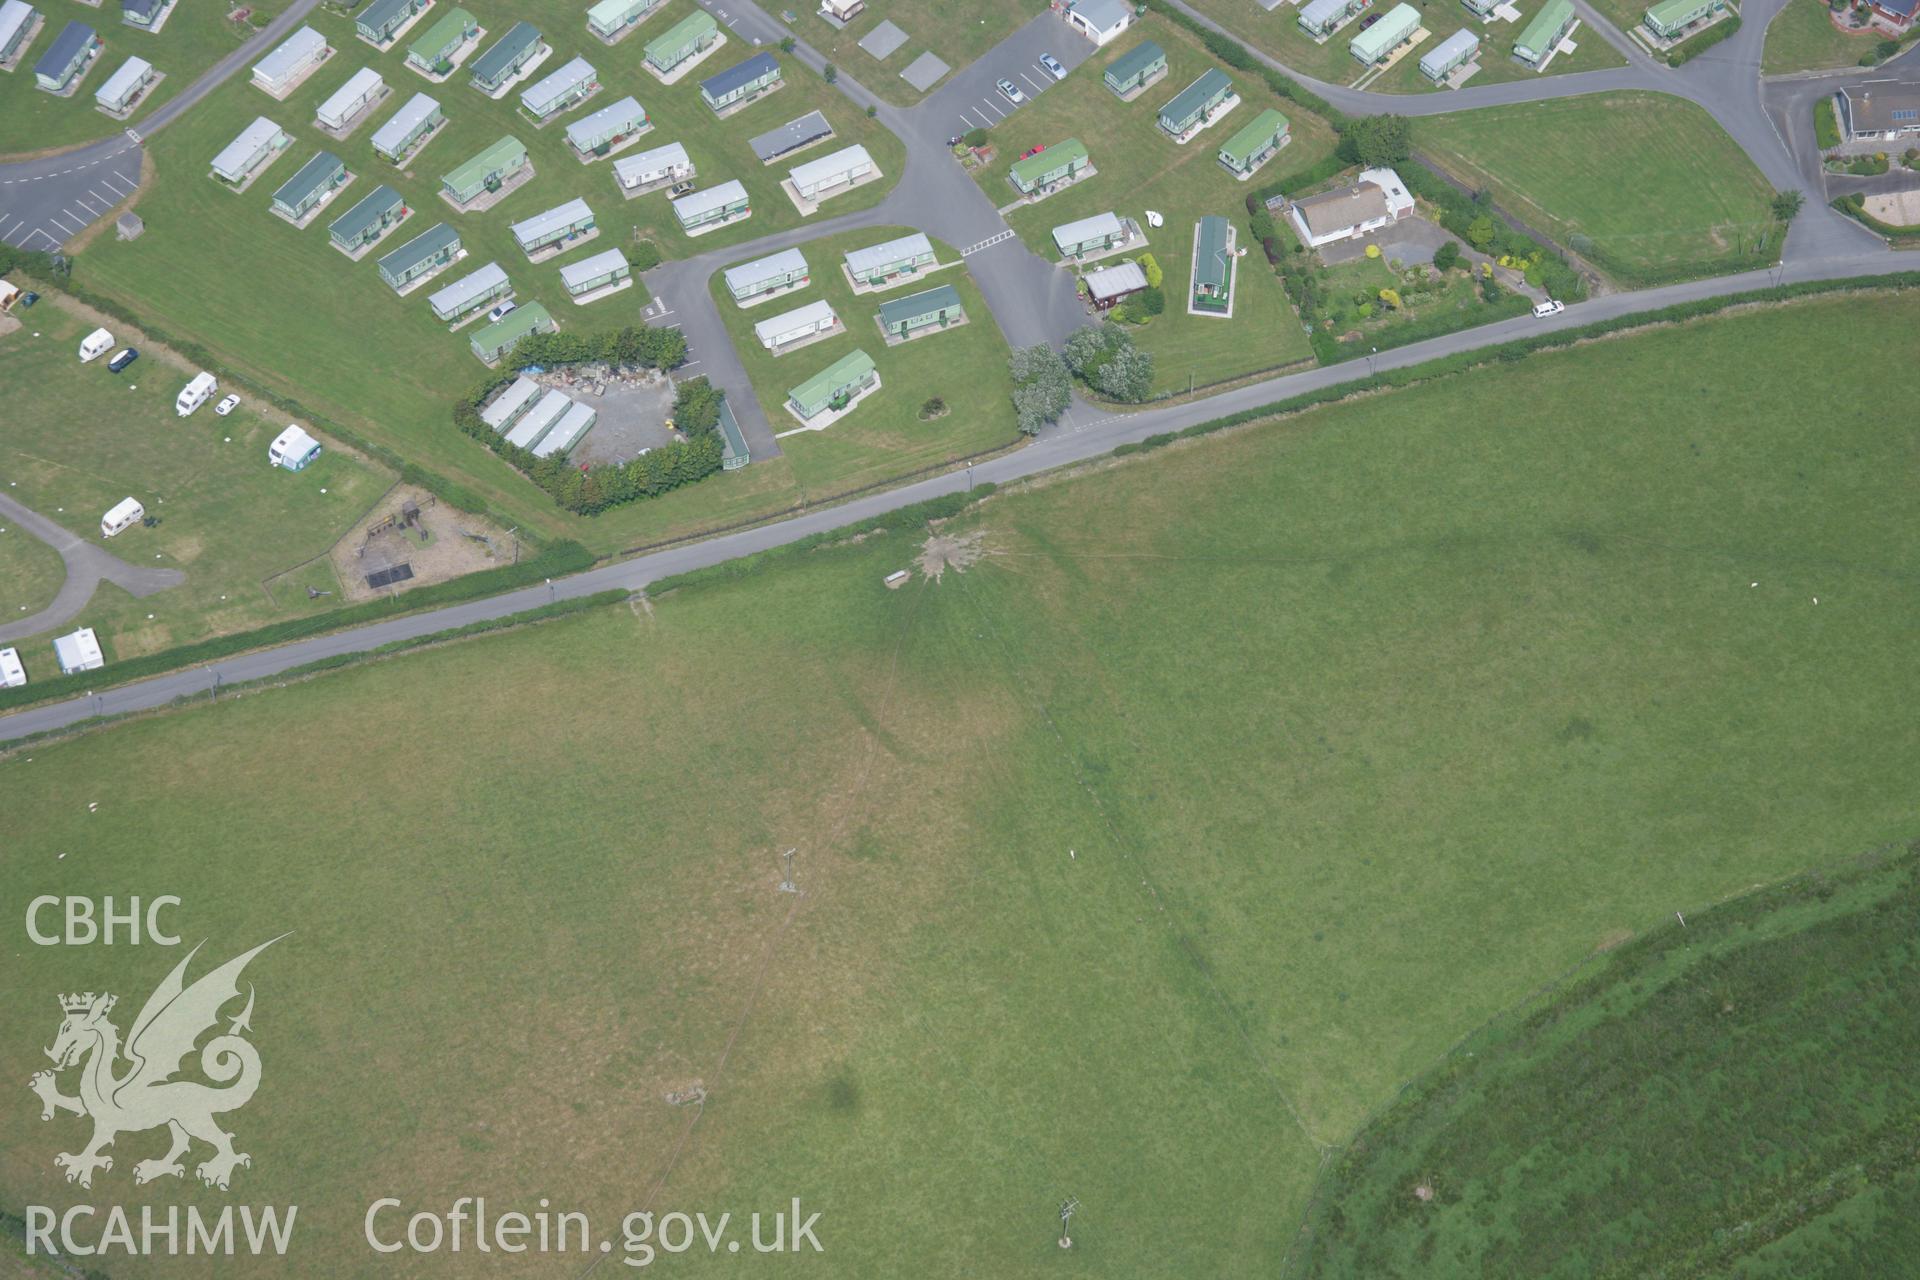 RCAHMW colour oblique aerial photograph of Glan-y-Mor Enclosure. Taken on 04 July 2006 by Toby Driver.